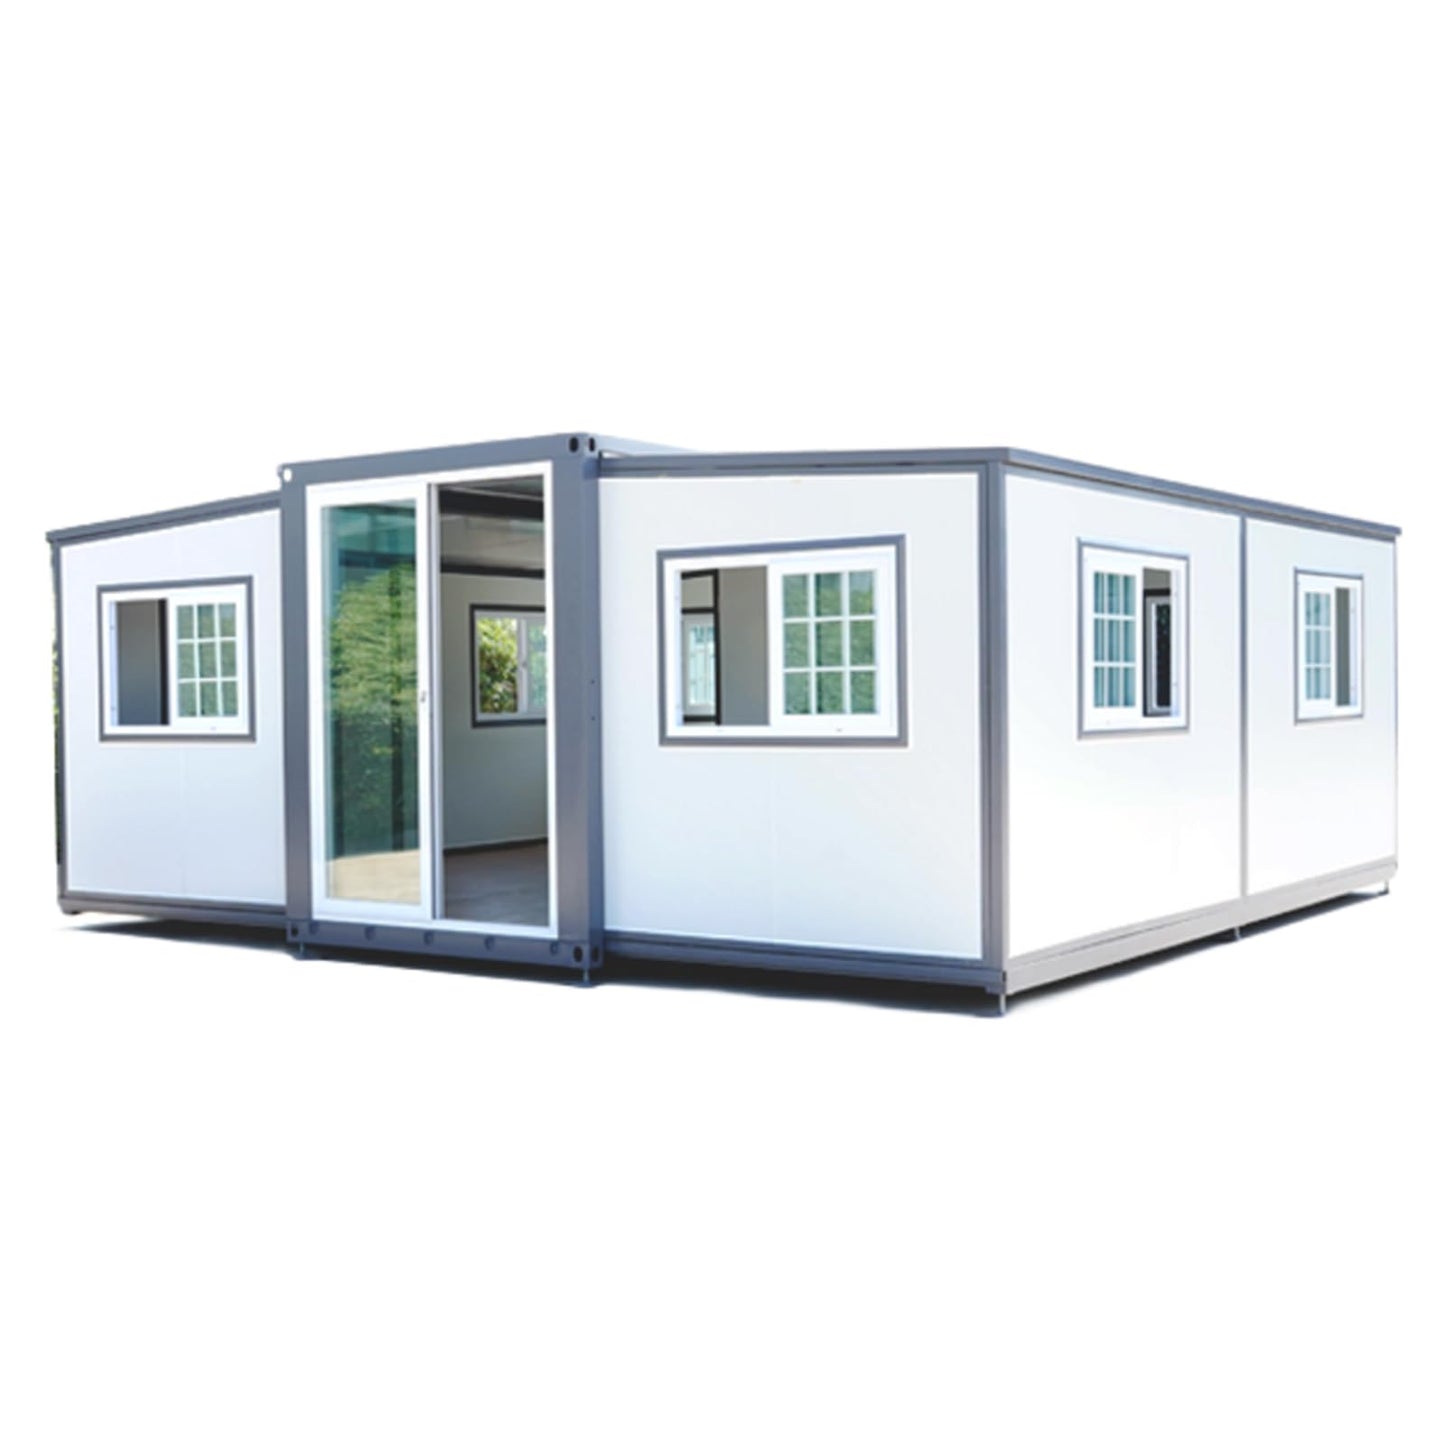 Chery Industrial Expandable Prefab House 19ft x 20ft with Cabinet,Exquisitely Designed Modern Villa Prefab House for Live,Work